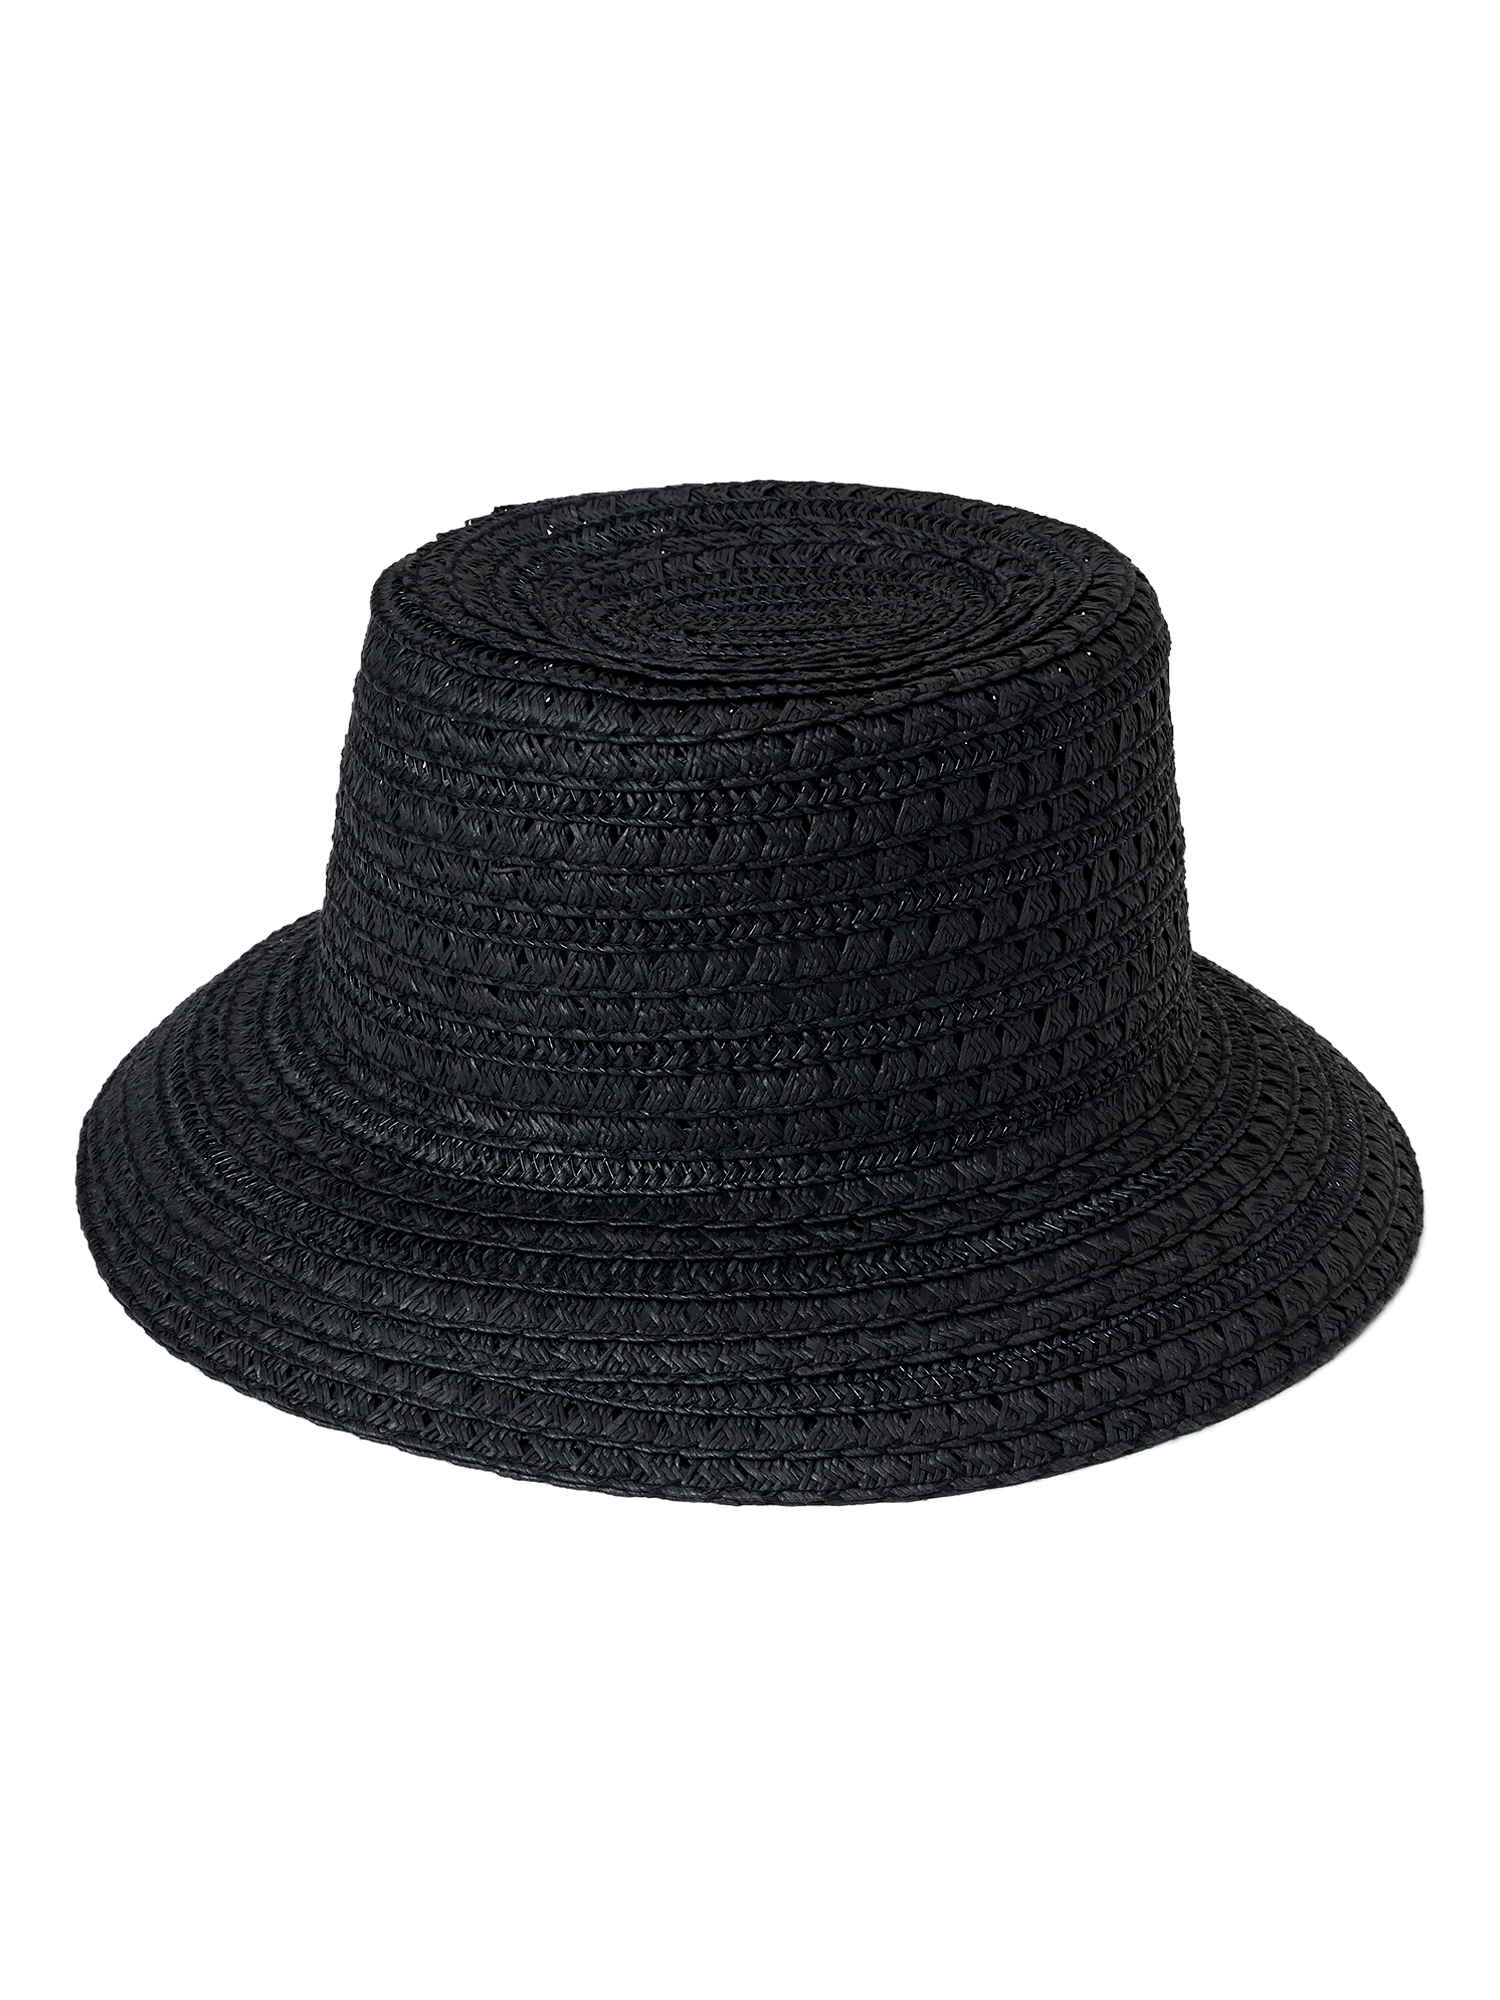 Time and Tru Adult Women's Straw Bucket Hat - image 2 of 3